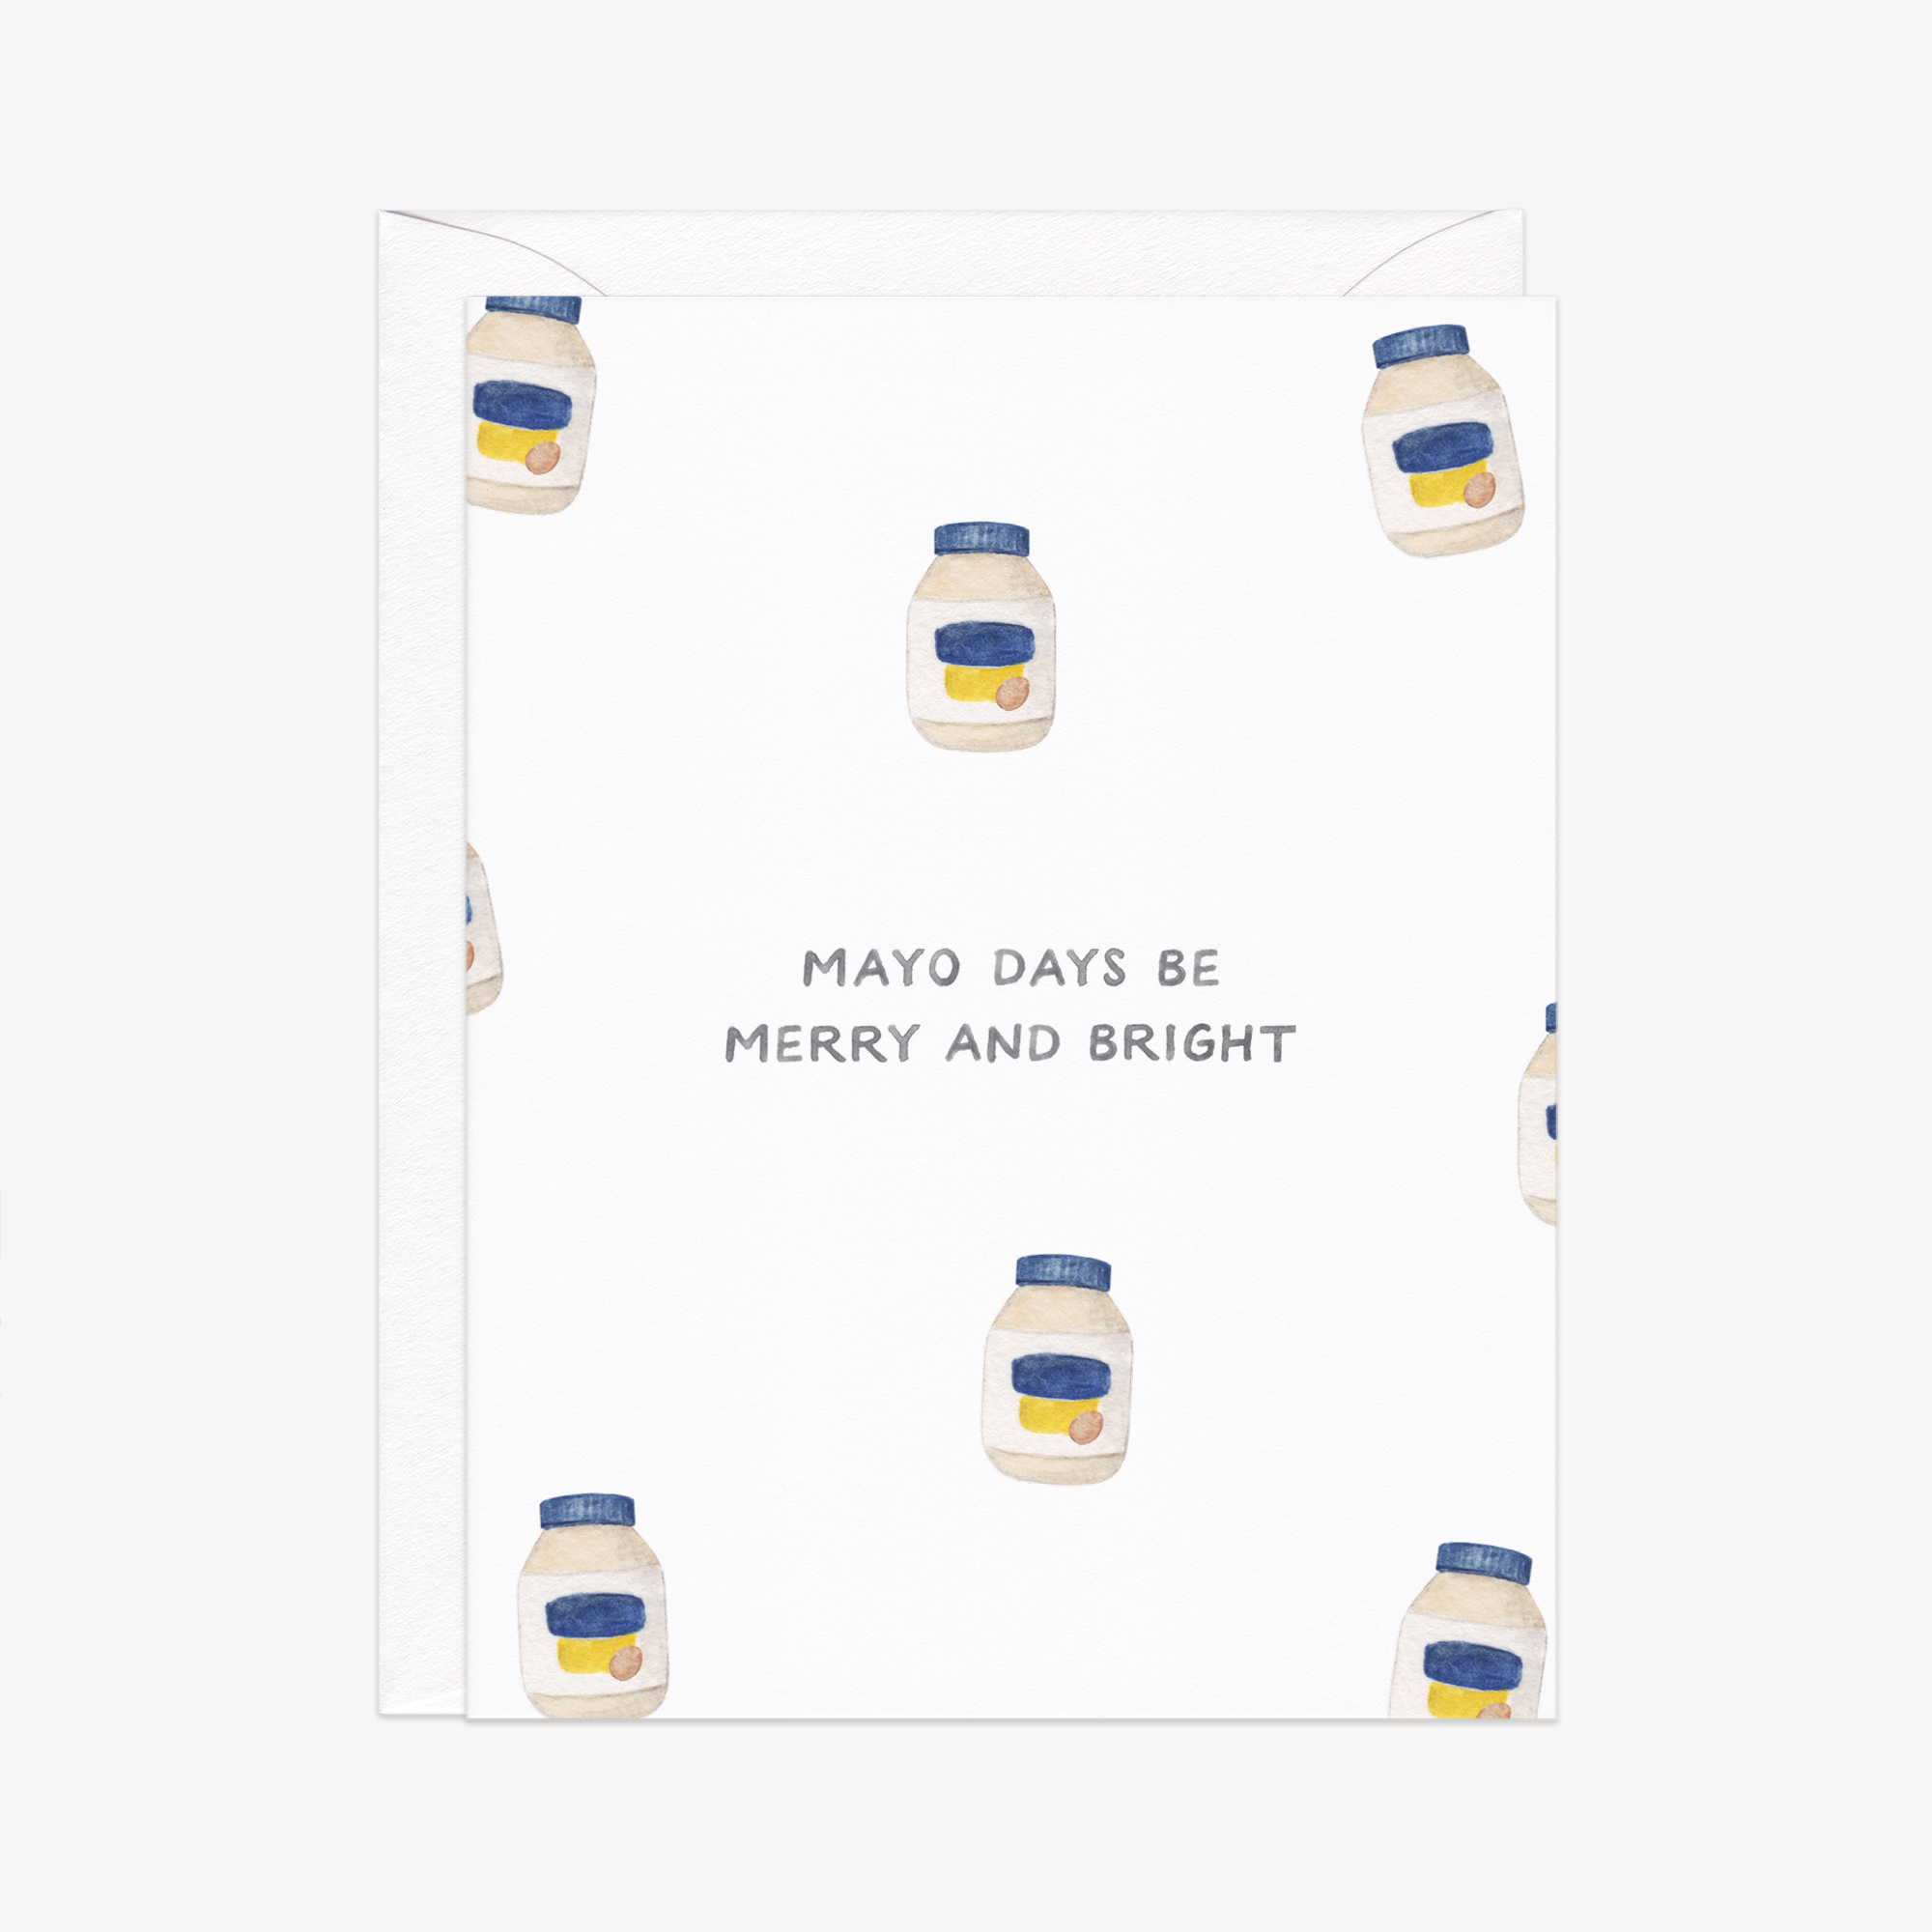 Mayo Days Be Merry Holiday Card